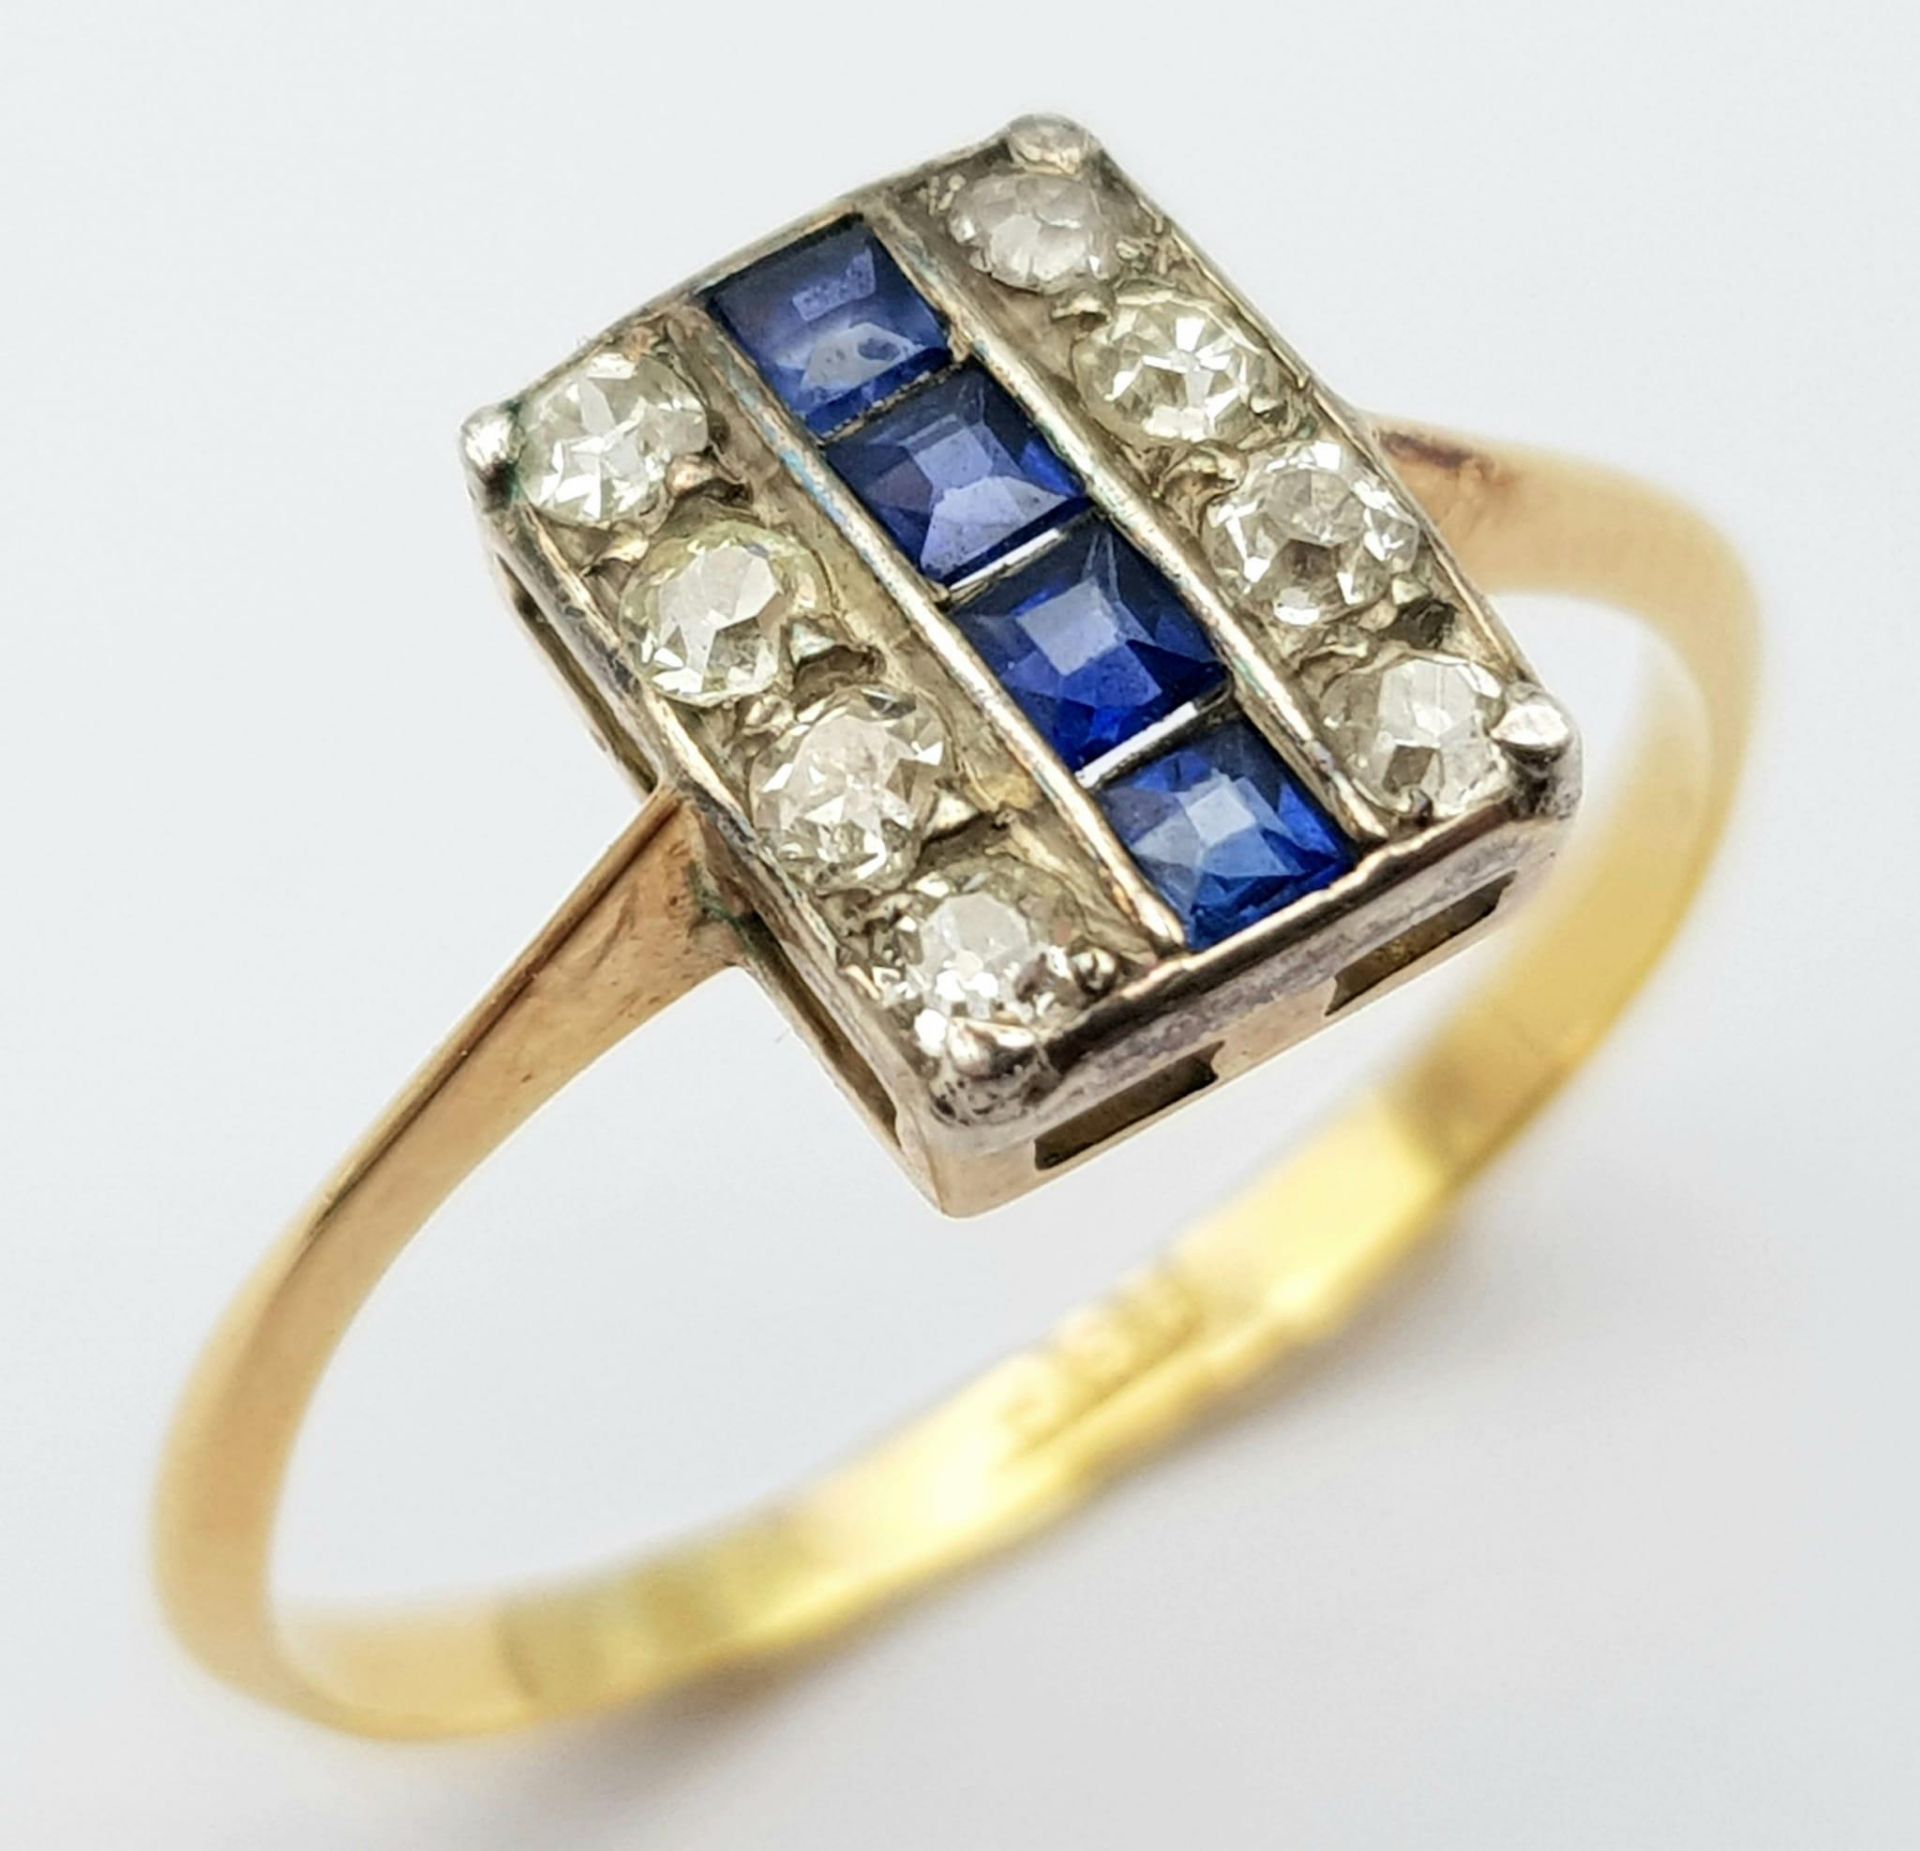 A Vintage 18K Yellow Gold Sapphire and Diamond Ring. Four square cut sapphires between eight round